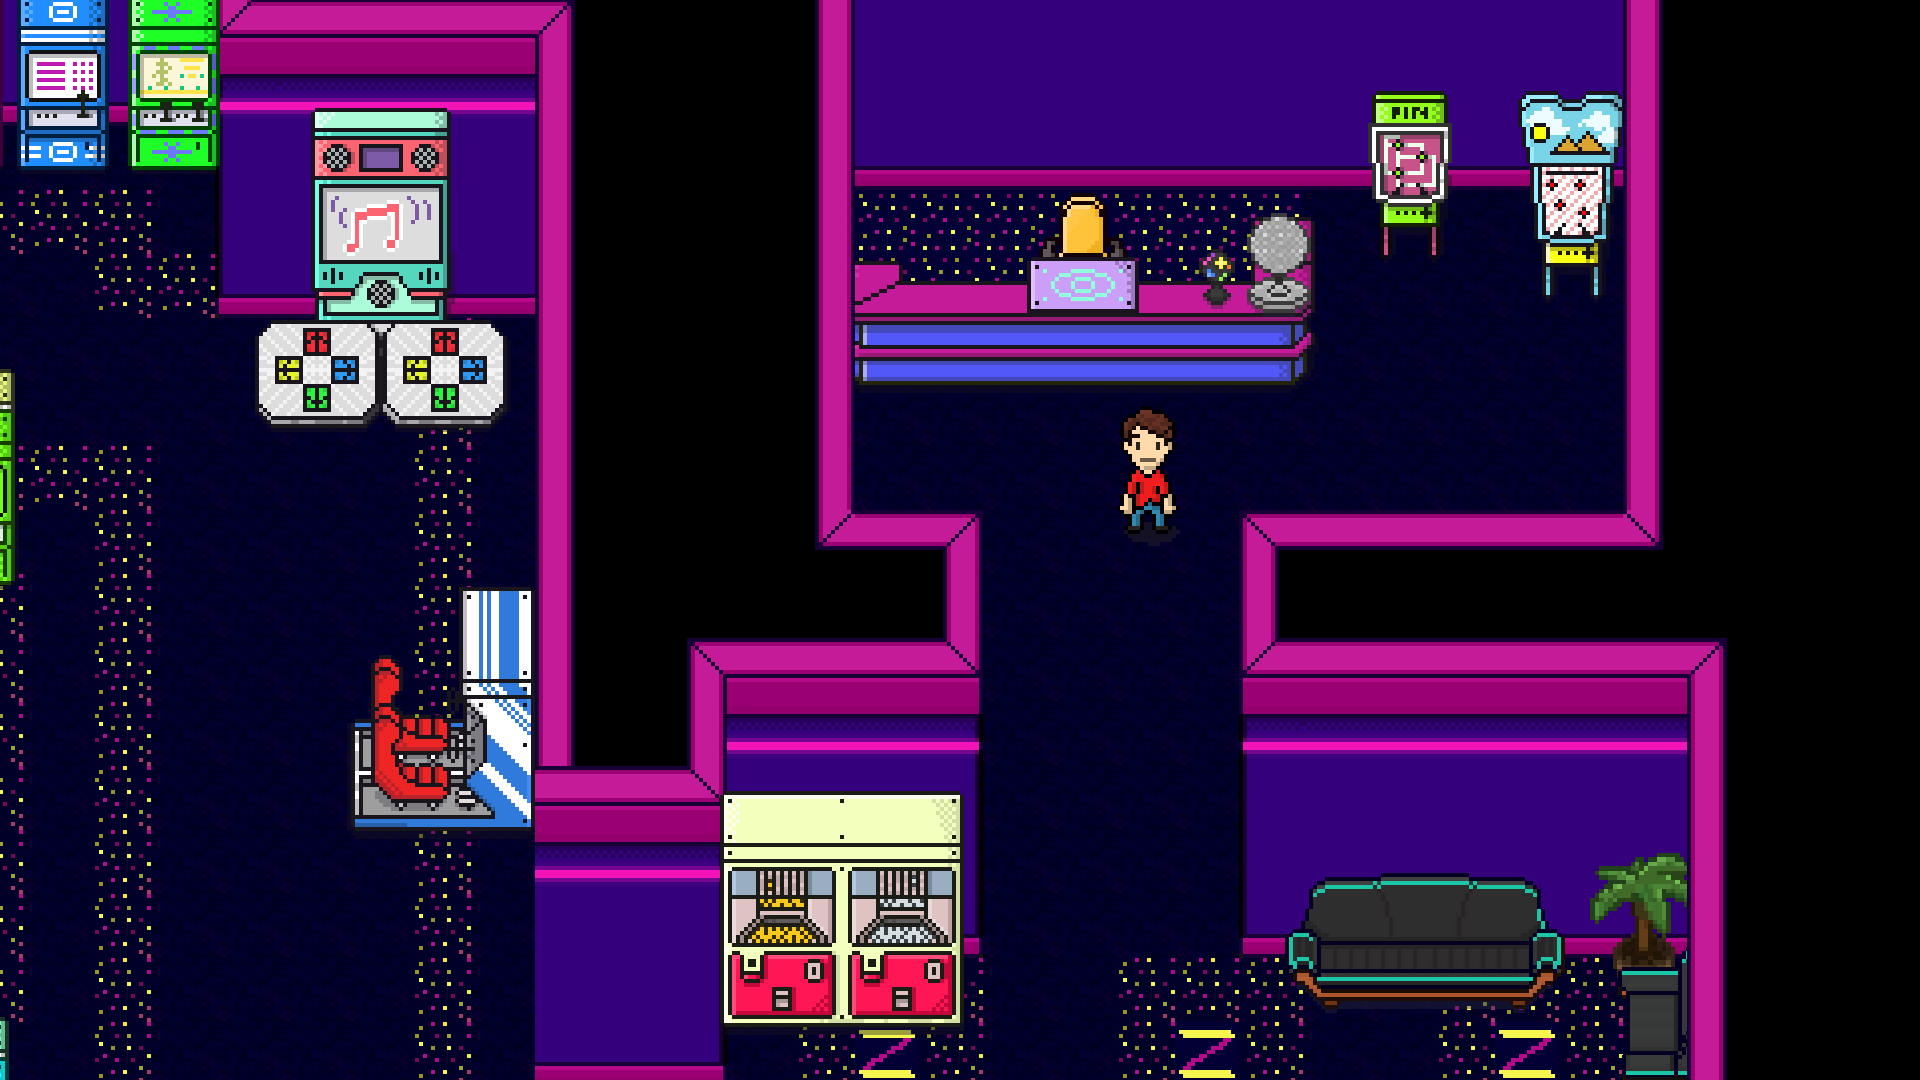 Main character standing in the Arcade